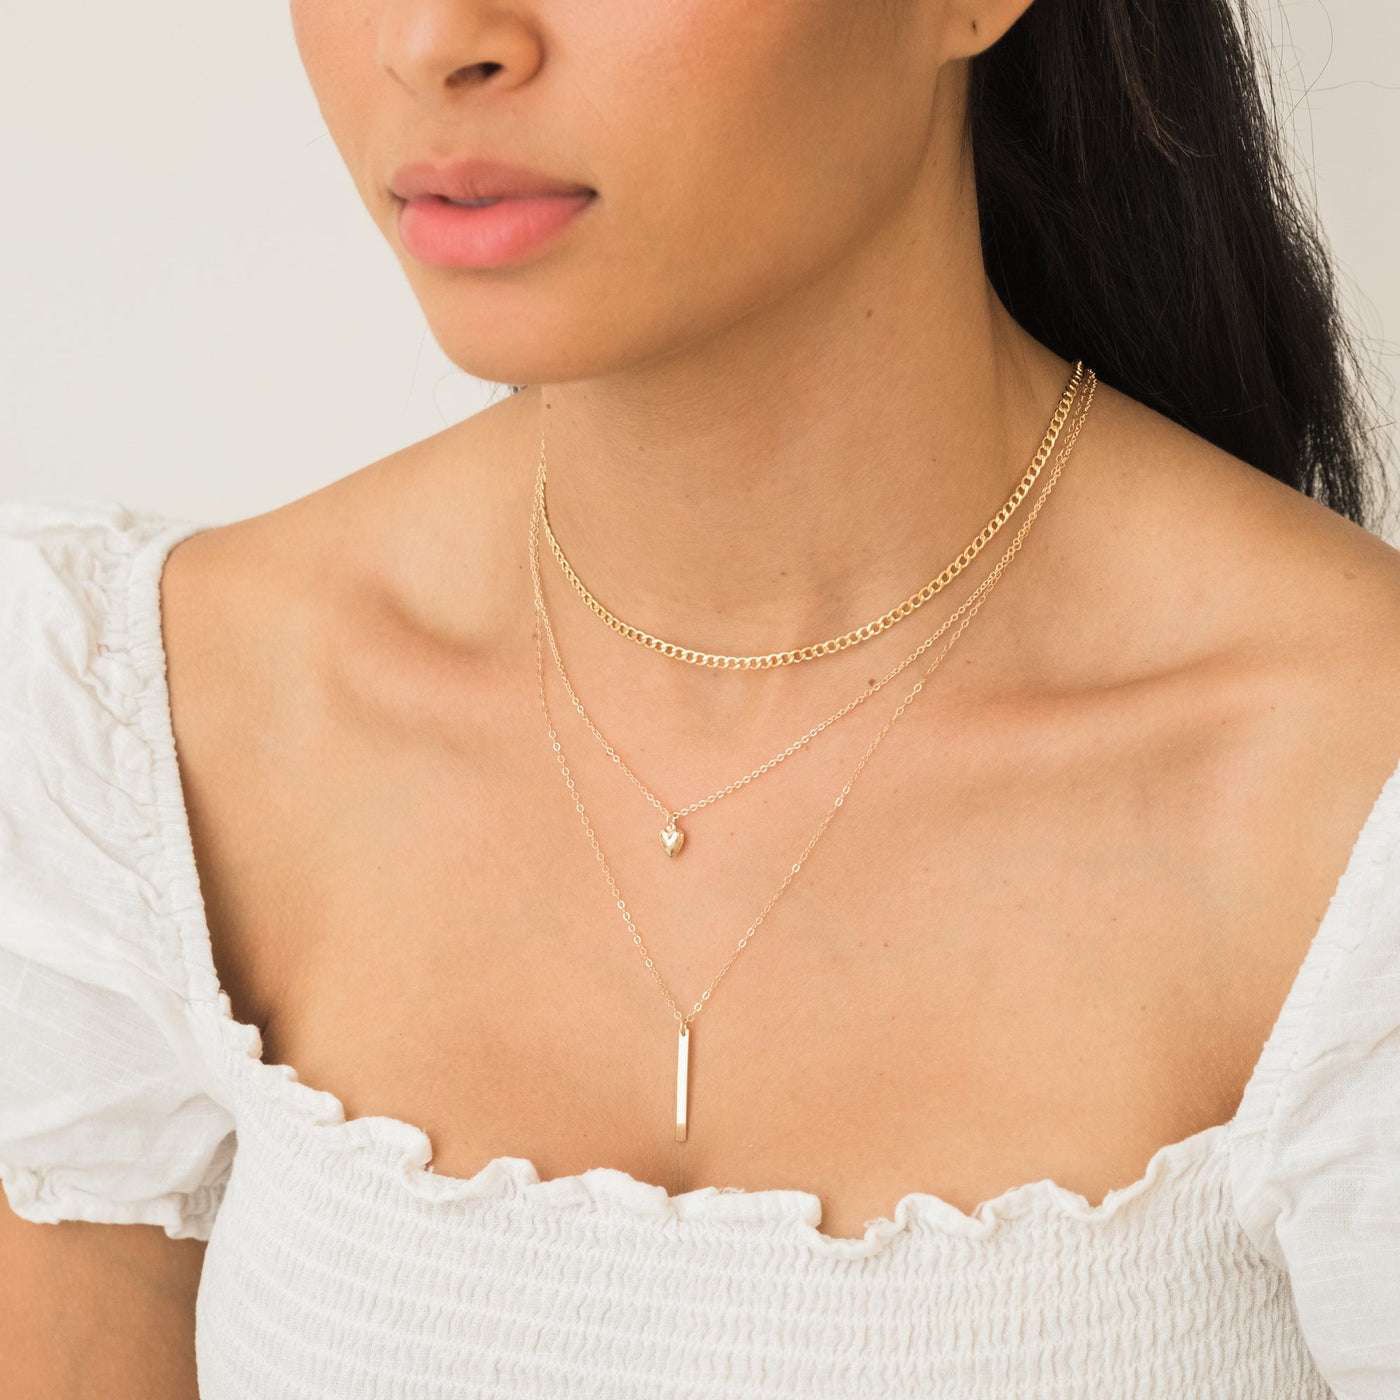 Hanging Bar Necklace | Simple & Dainty Jewelry